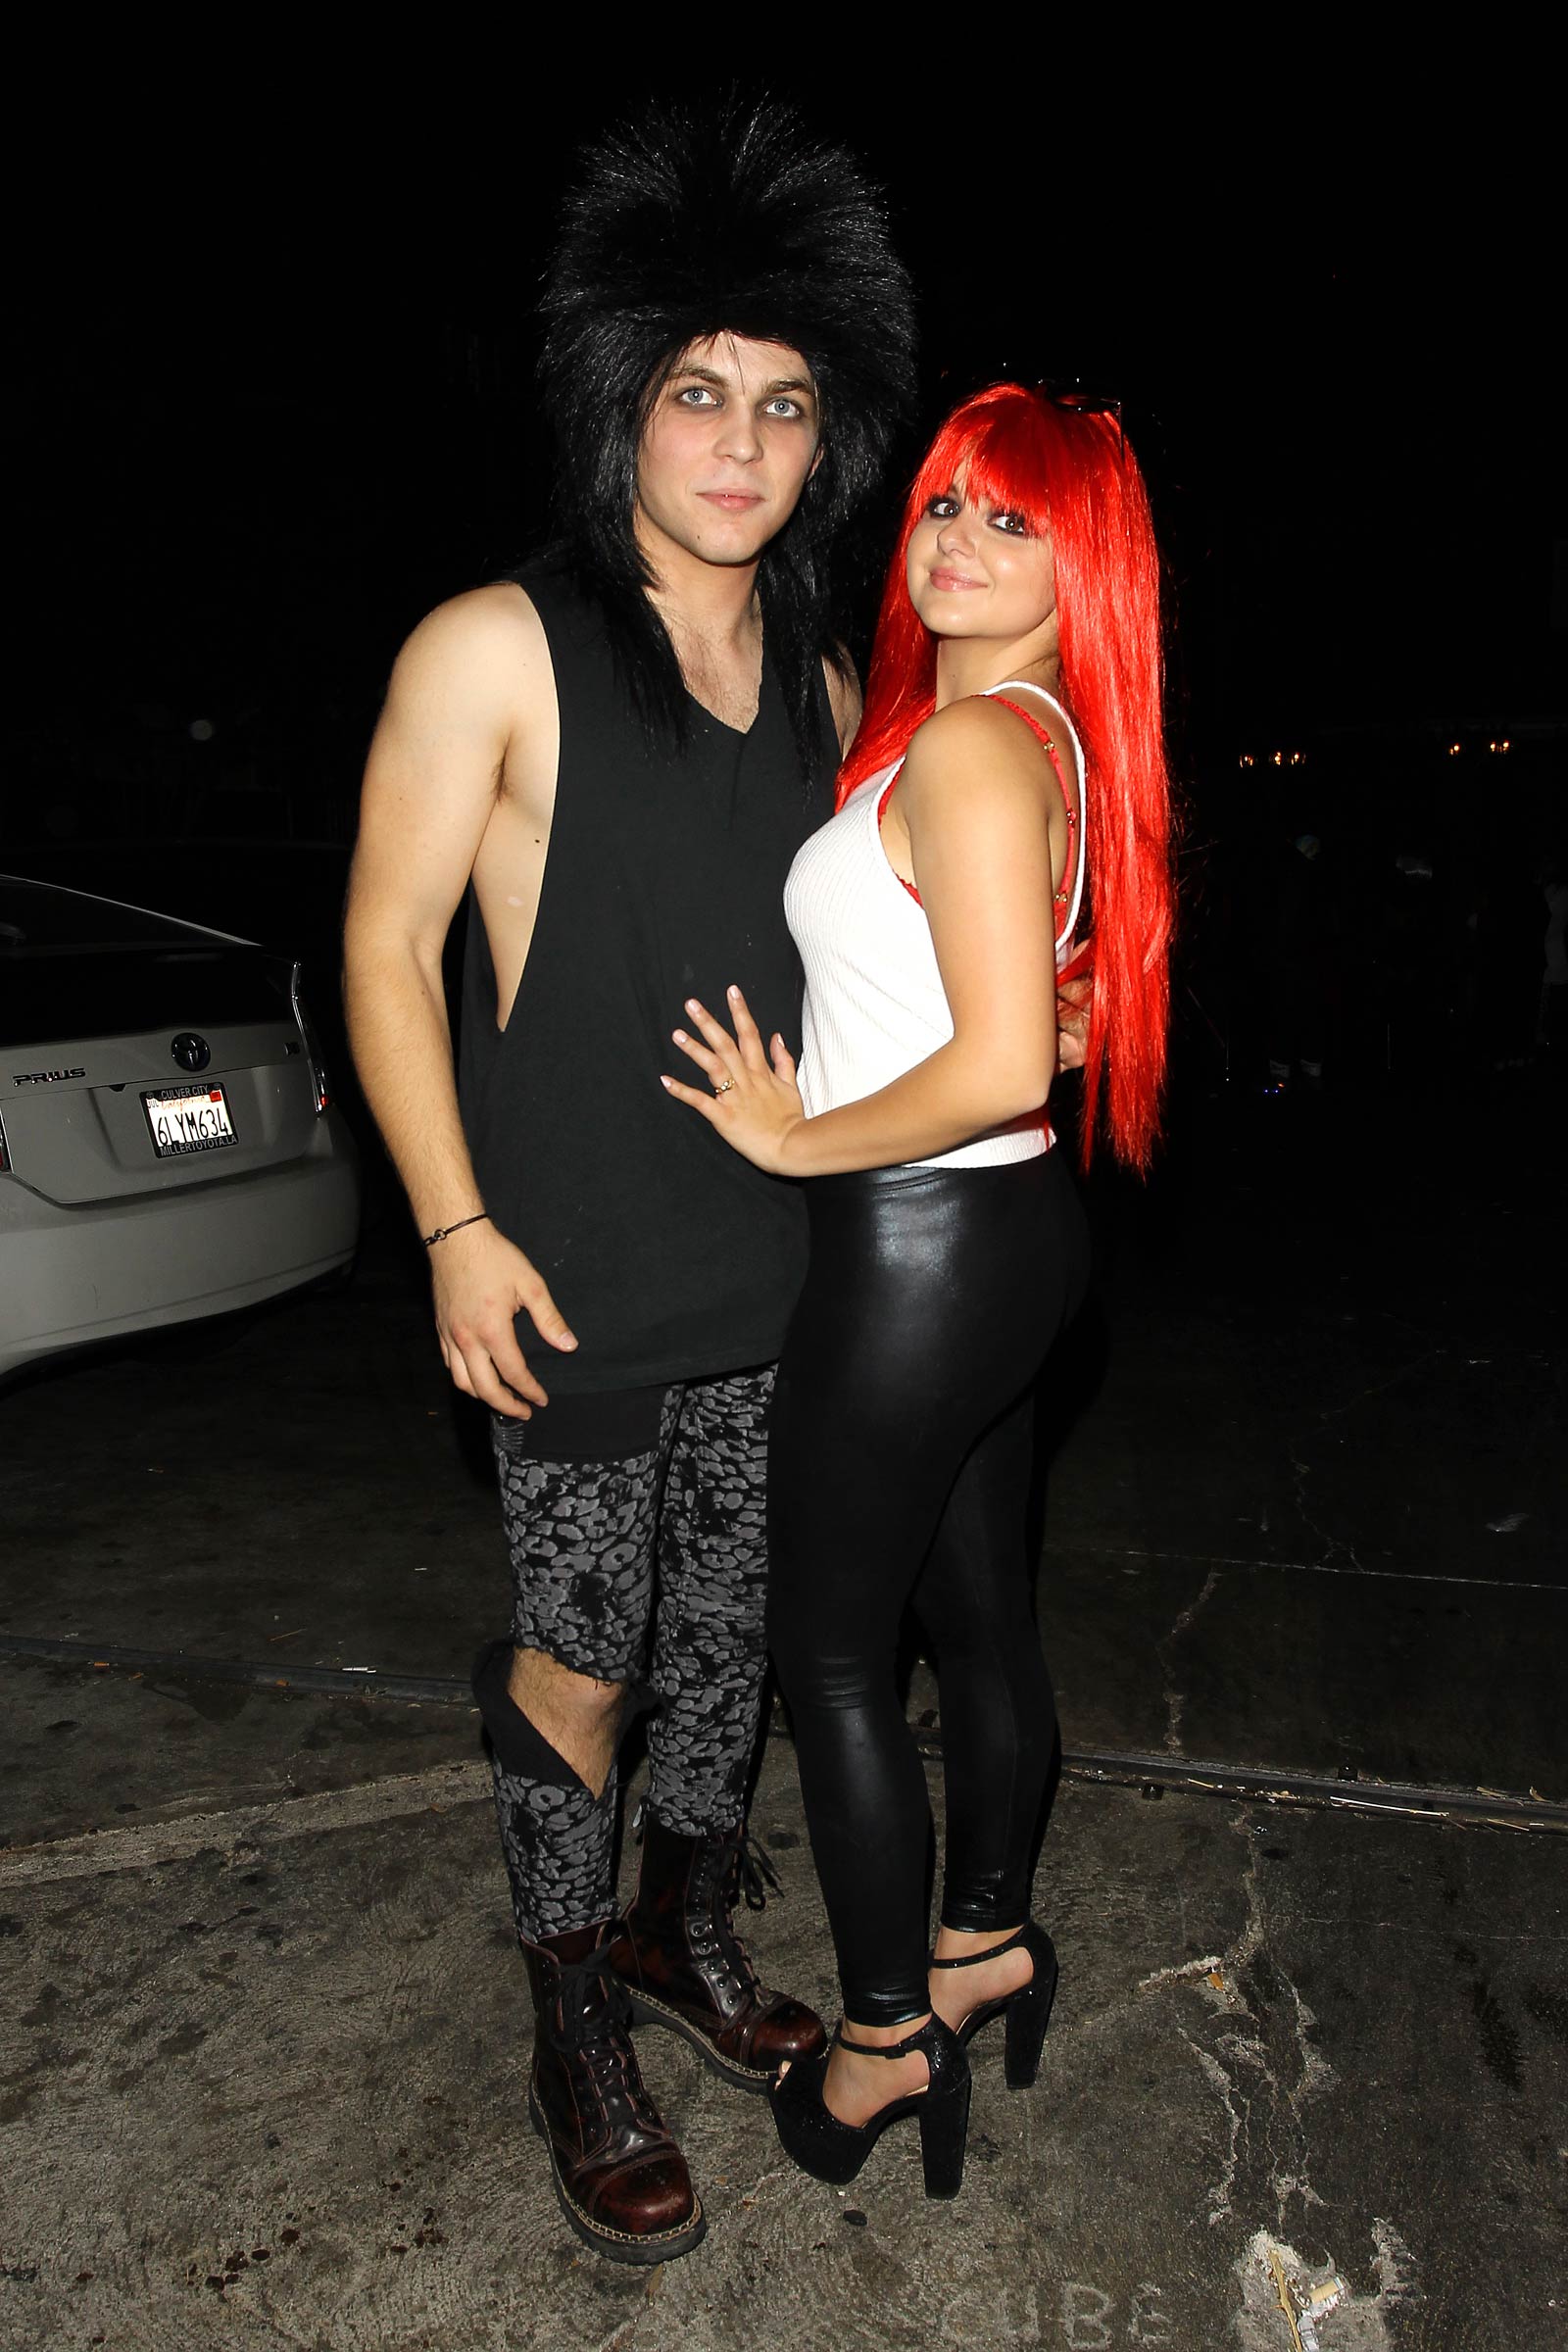 Ariel Winter attends at Just Jared Halloween Party